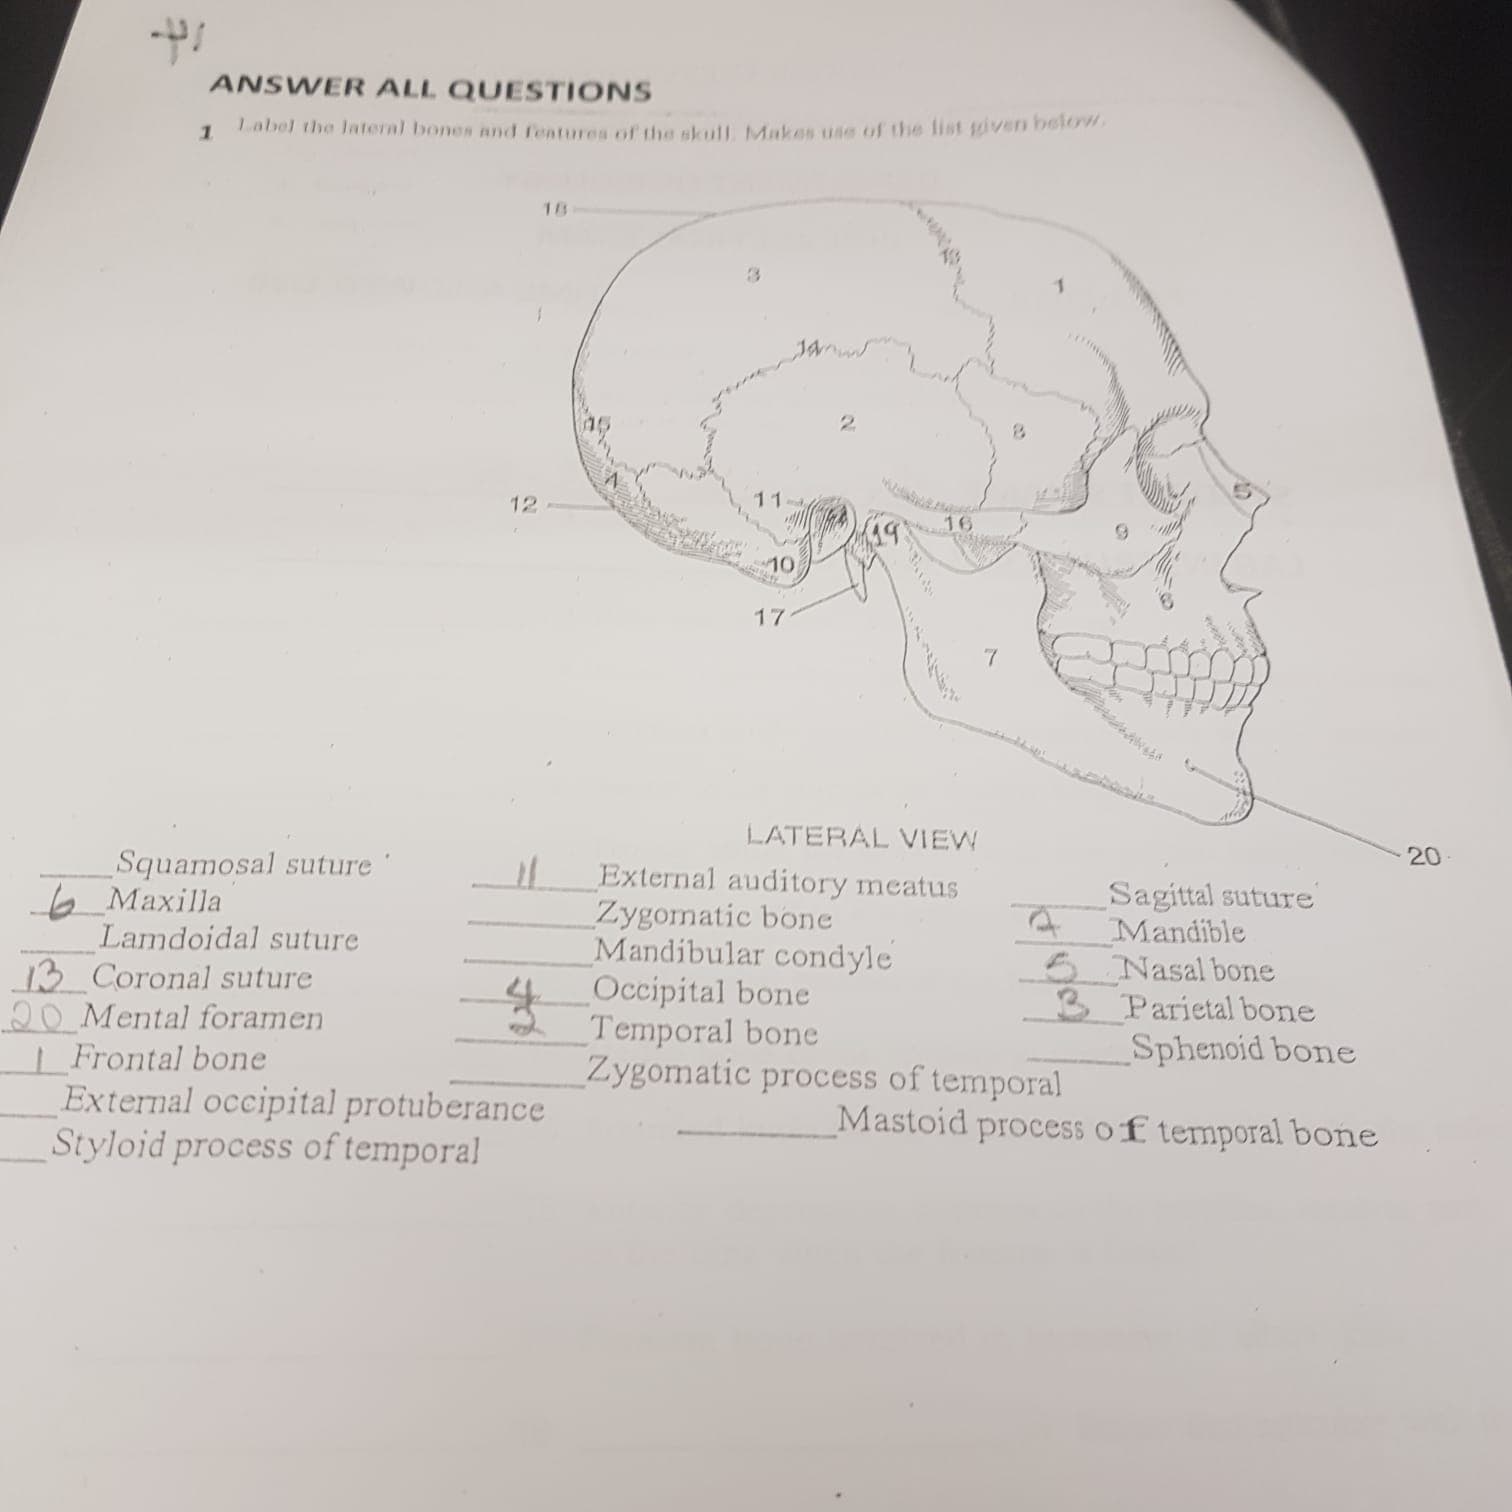 ANSWER ALL QUESTIONS
Label the lateral bones and features of the skull Mukas use of the list given belon
18
11
12
16
ло
17
LATERAL VIEW
20
Squamosal suture
b Maxilla
Lamdoidal suture
13 Coronal suture
20 Mental foramen
| Frontal bone
External occipital protuberance
Styloid process of temporal
External auditory meatus
Zygomatic bone
Mandibular condyle
Occipital bone
Temporal bone
Zygomatic process of temporal
Sagittal suture
Mandible
5 Nasal bone
3 Parietal bone
Sphenoid bone
Mastoid process of temporal bone
